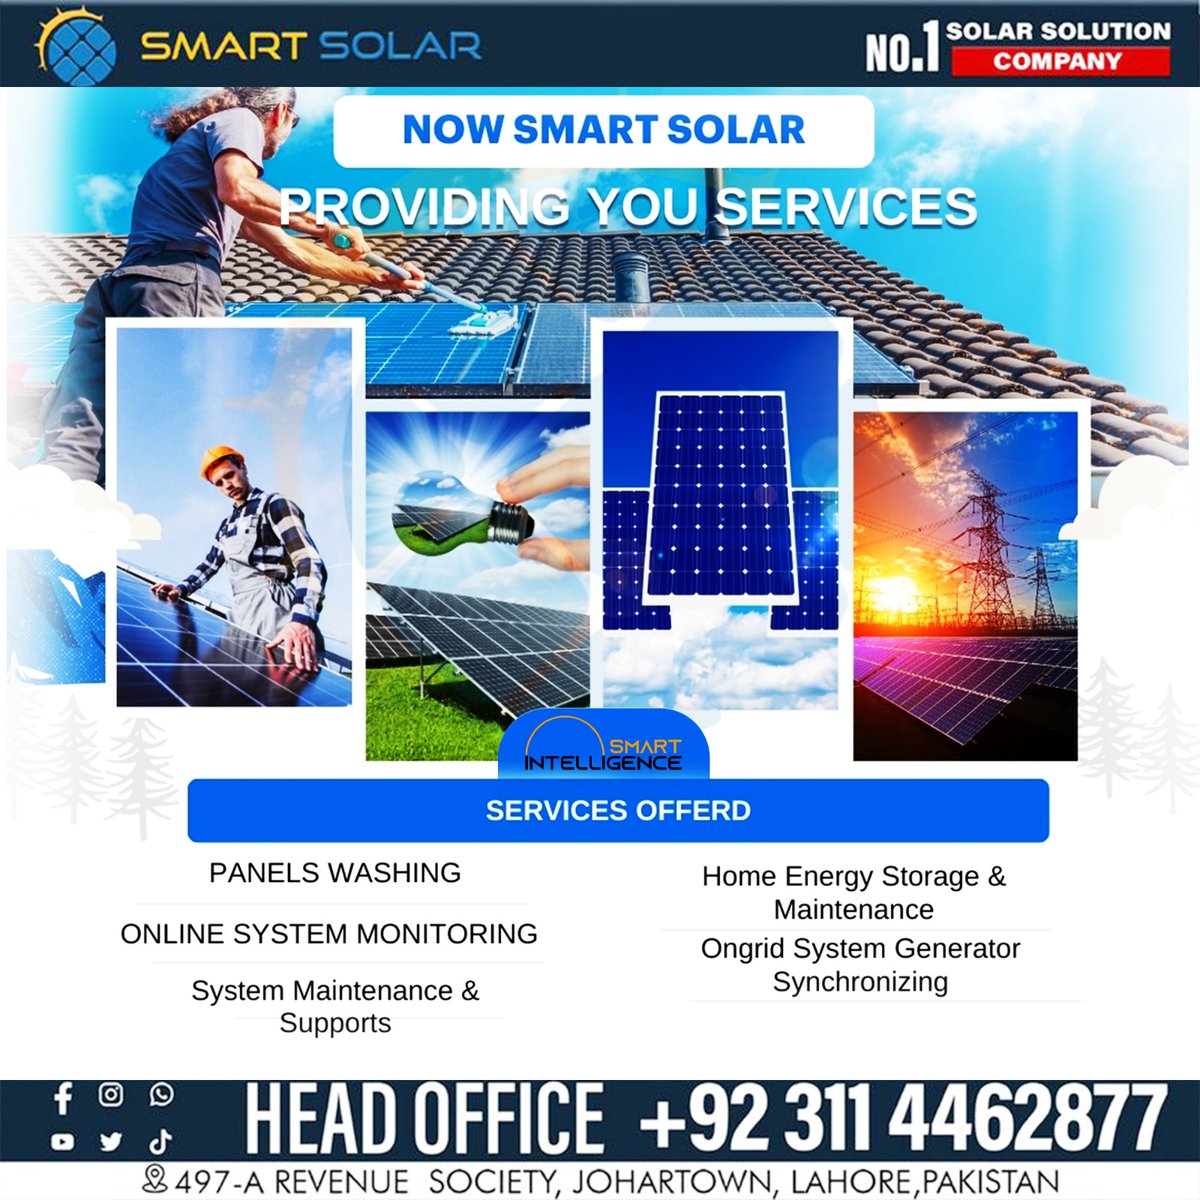 We sell peace of mind | Get Smart Solar Services and get rid of all issues.
For more details please contact 0311-4011444
#SmartSolar #Solar #SolarPanels #SolarBatteries #SolarInverters #SolarInstallation #SolarHeater